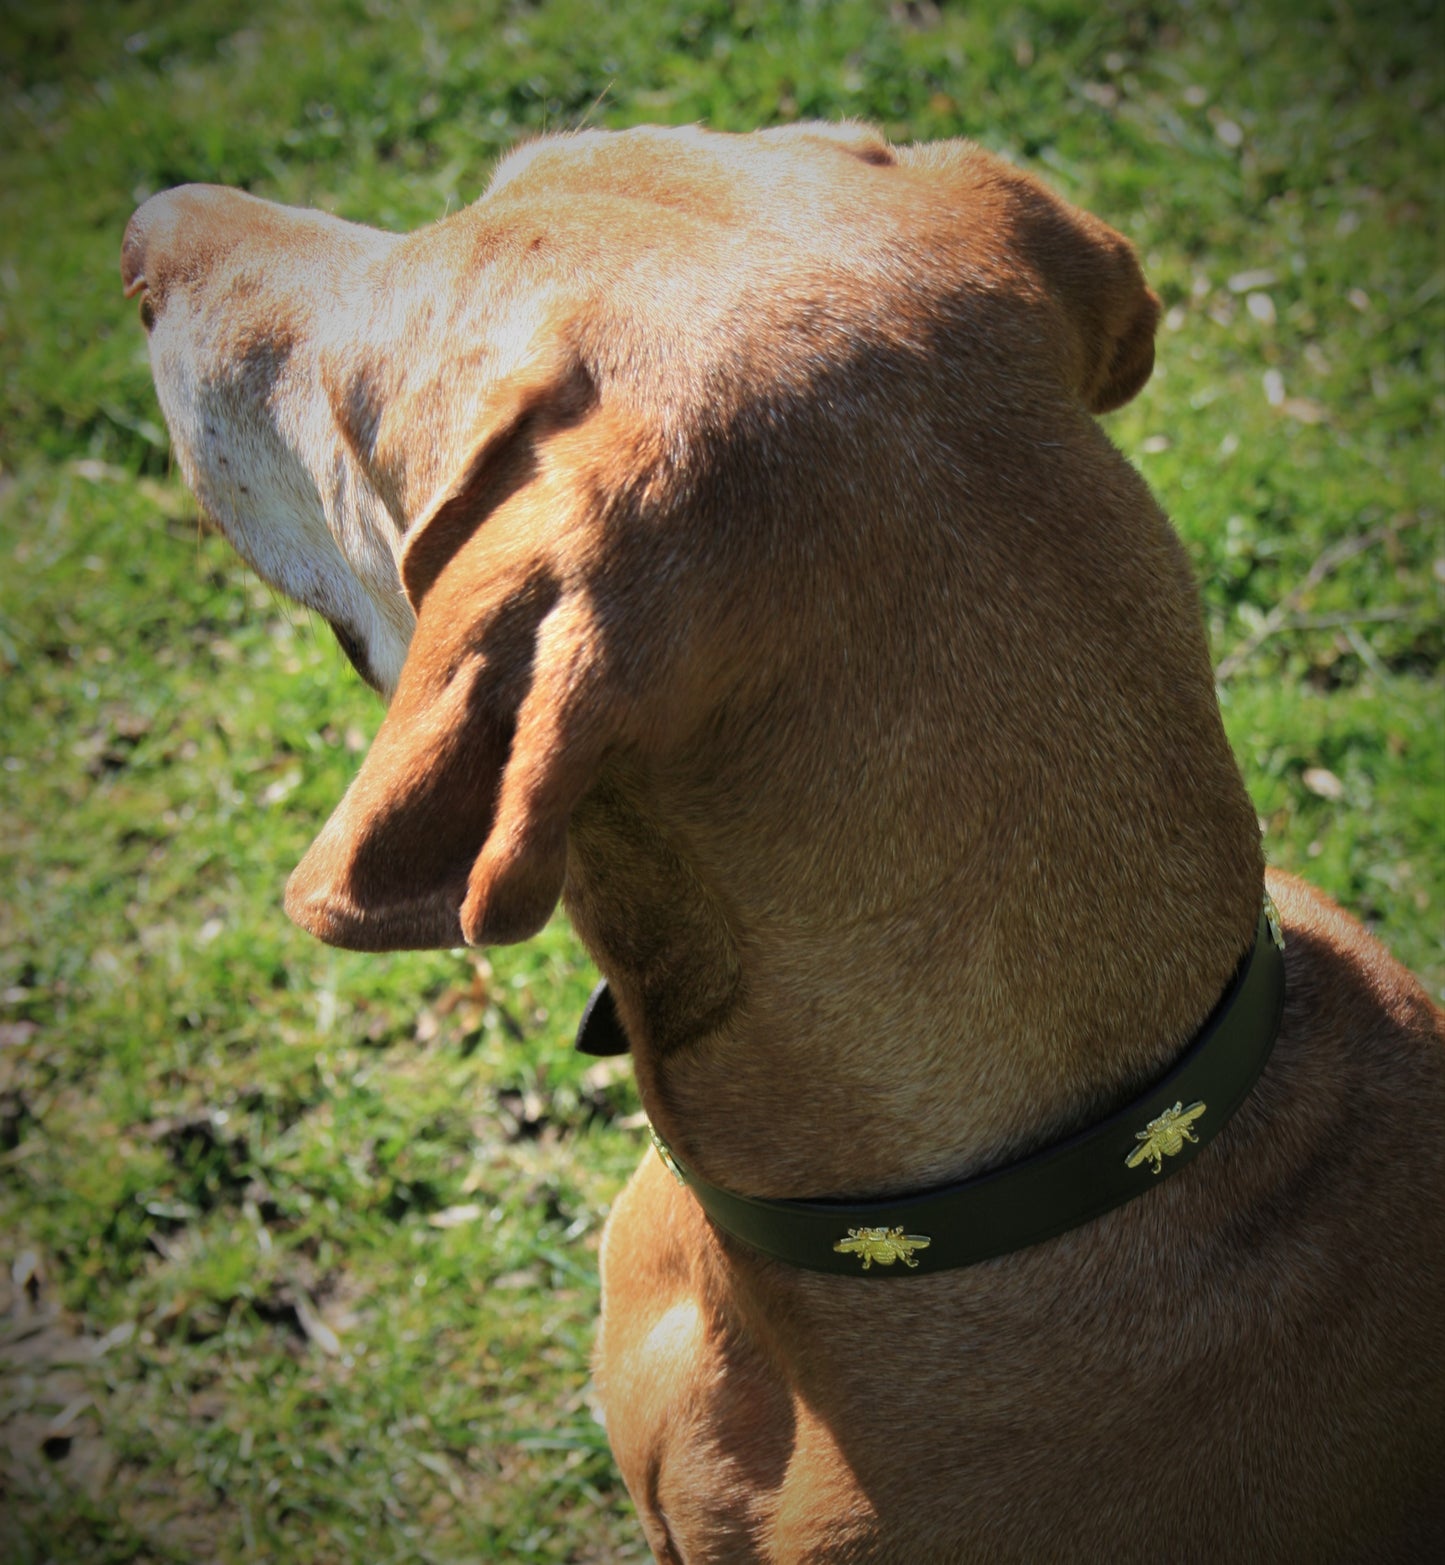 'The Bumble' Golden Bees Dark Brown Leather Dog Collar